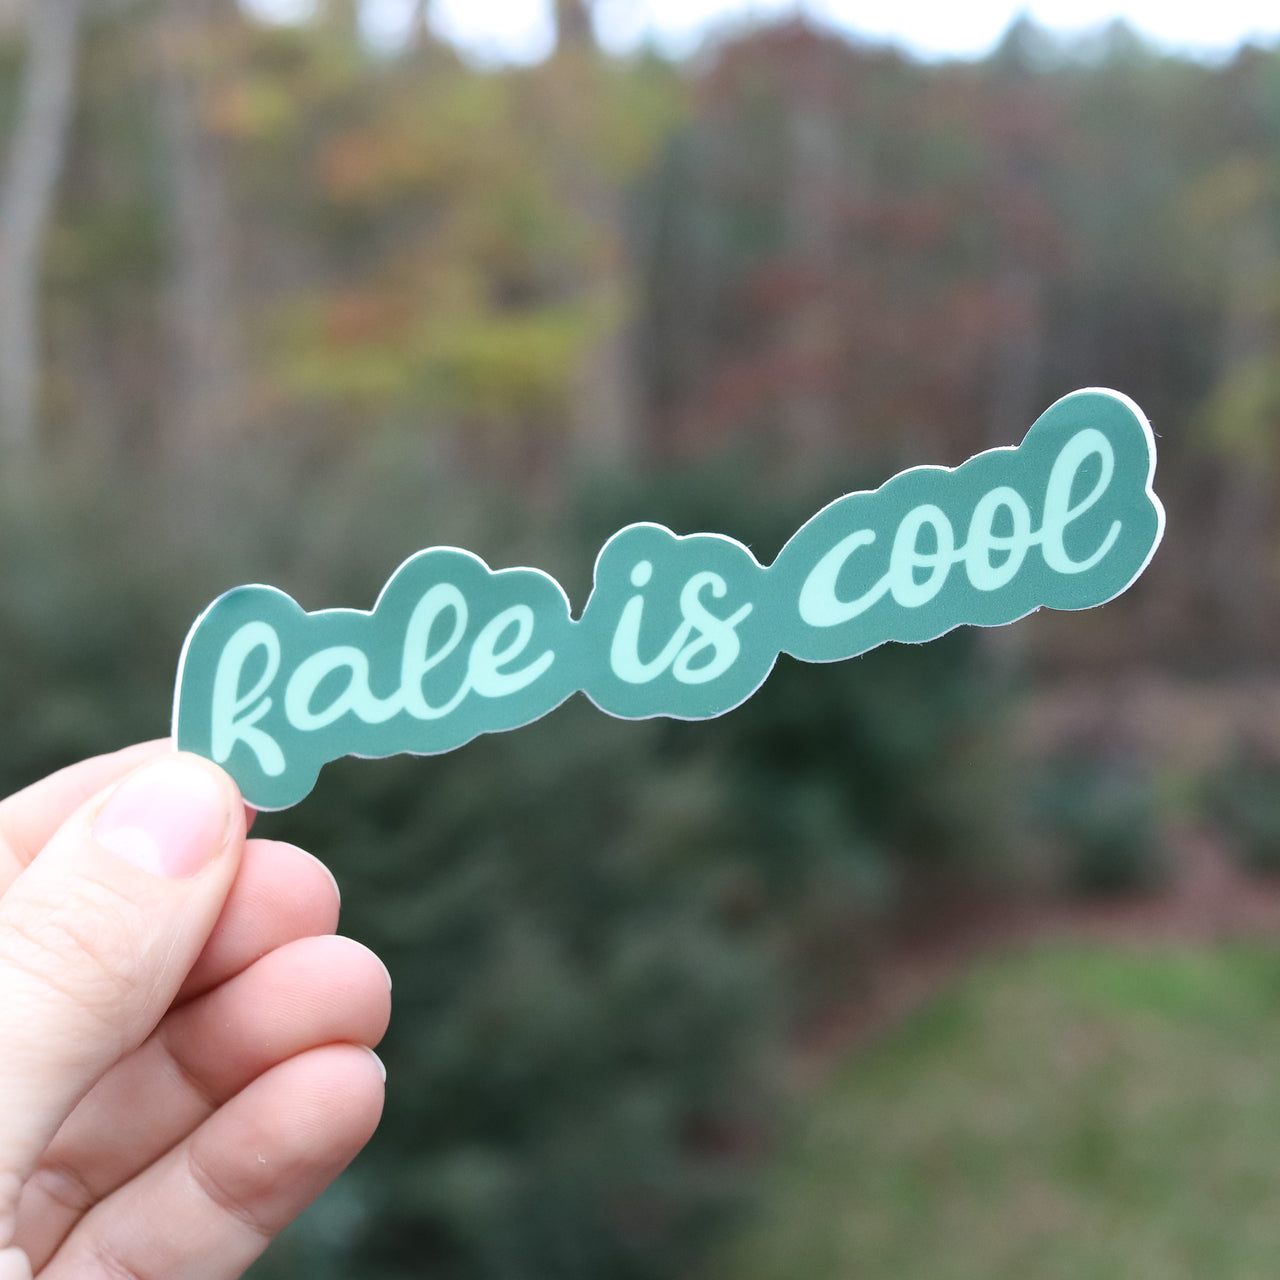 kale is cool sticker | farmer's market collection | overflow & co